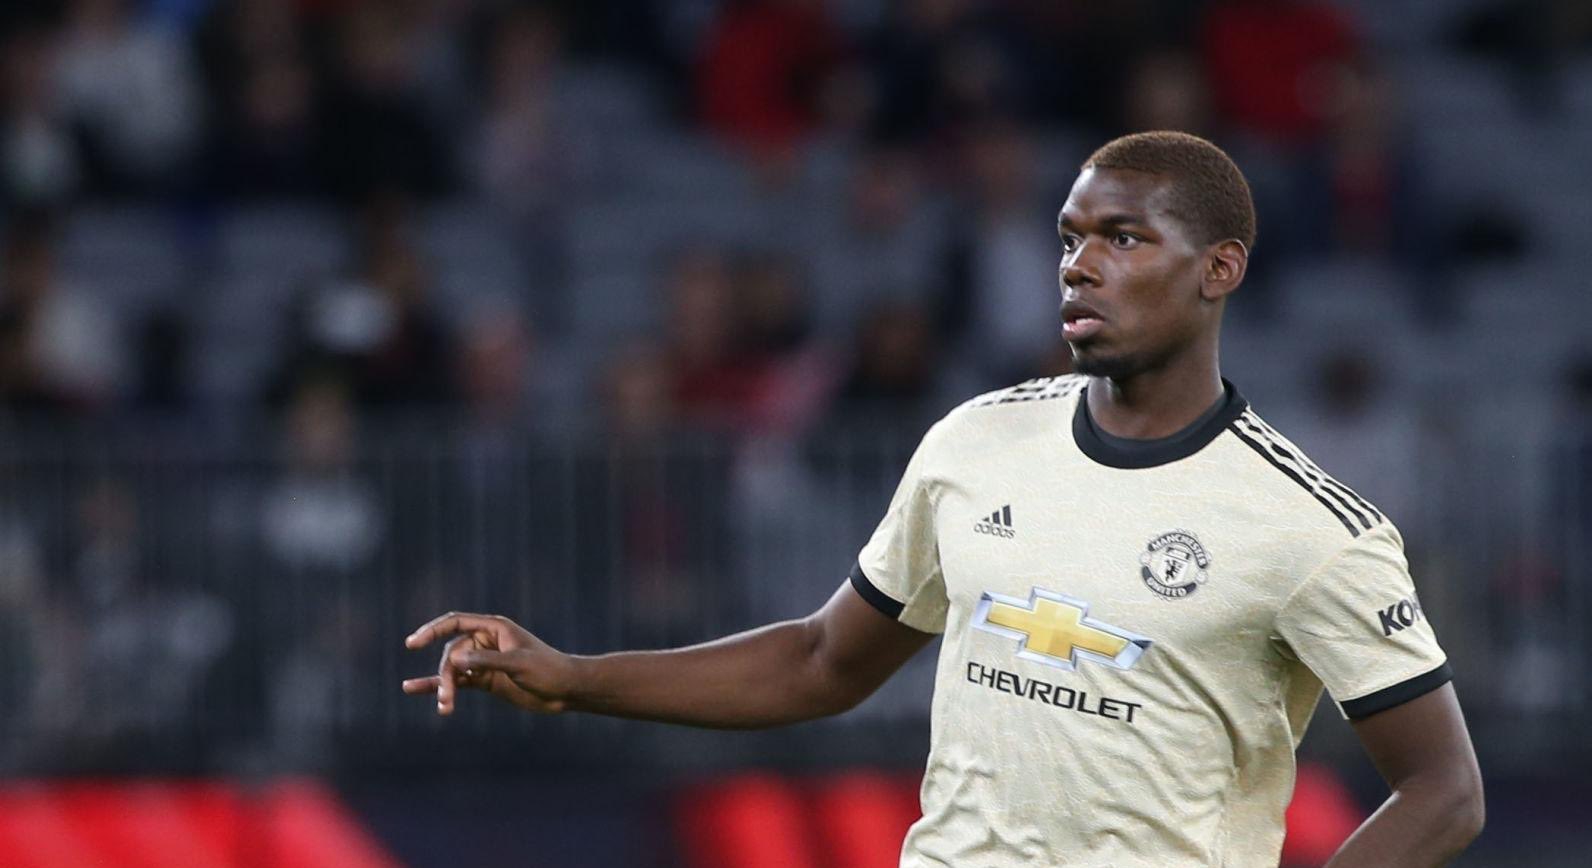 Manchester United want £180m for Paul Pogba